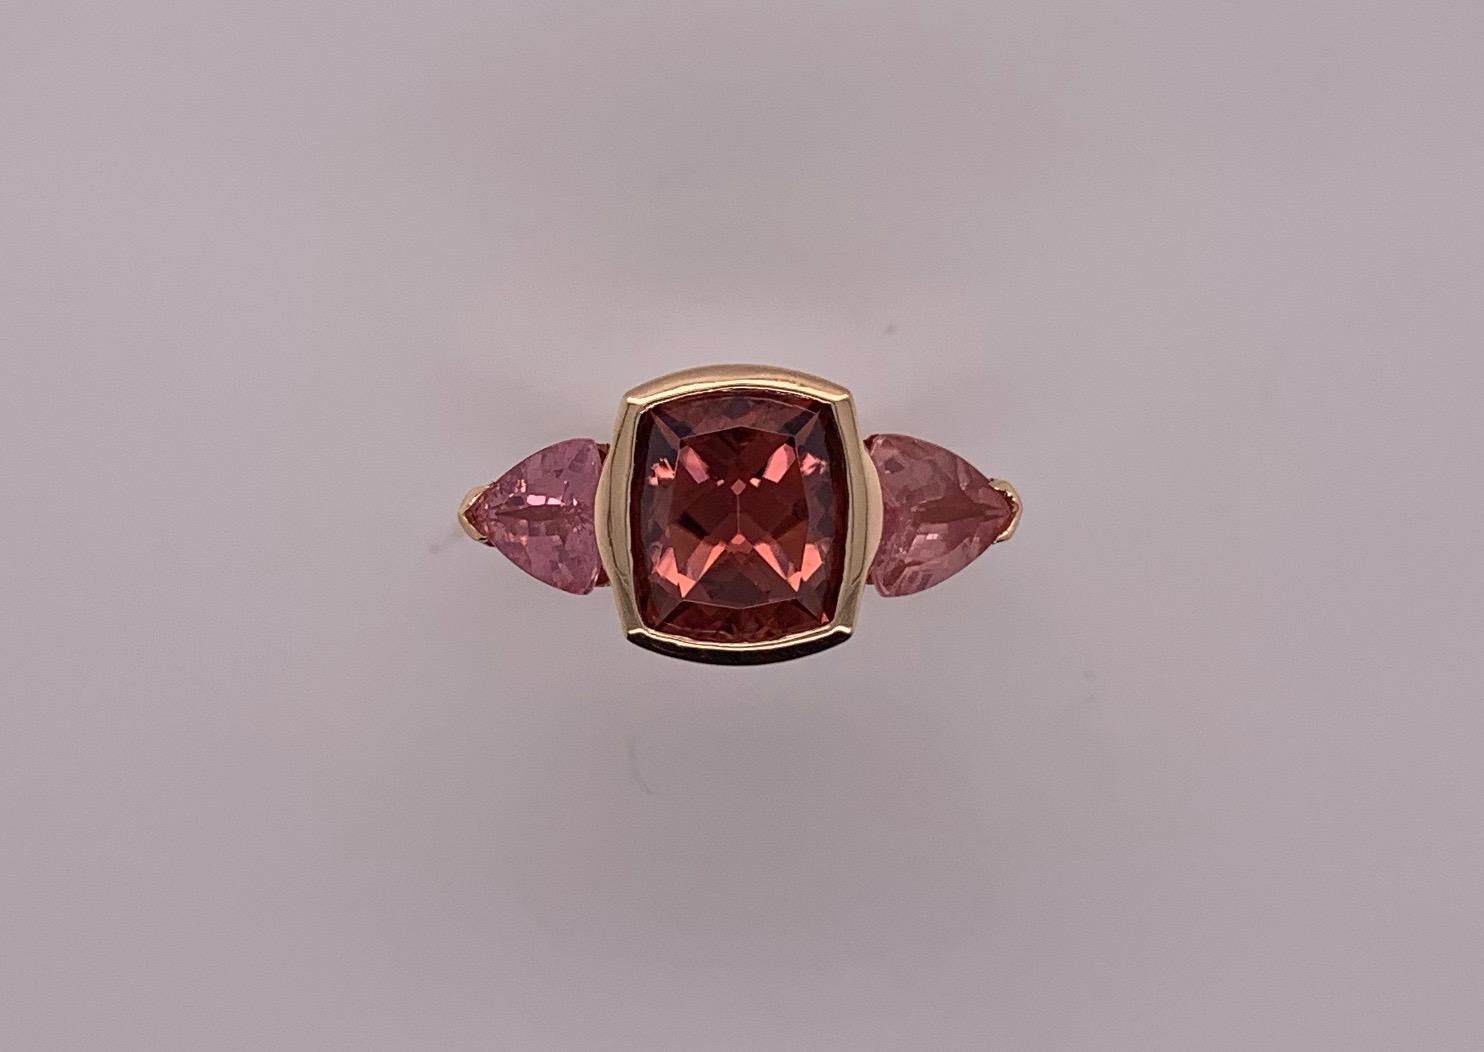 Custom design - Rose gold with natural Zircon and Spinel. This Vance Design is one of a kind, The Zircon is a chambord colored 7.01 carat cushion cut. The spinels are a matched pair of trillion cut pink stones weighing 2.26 carats. We call it our